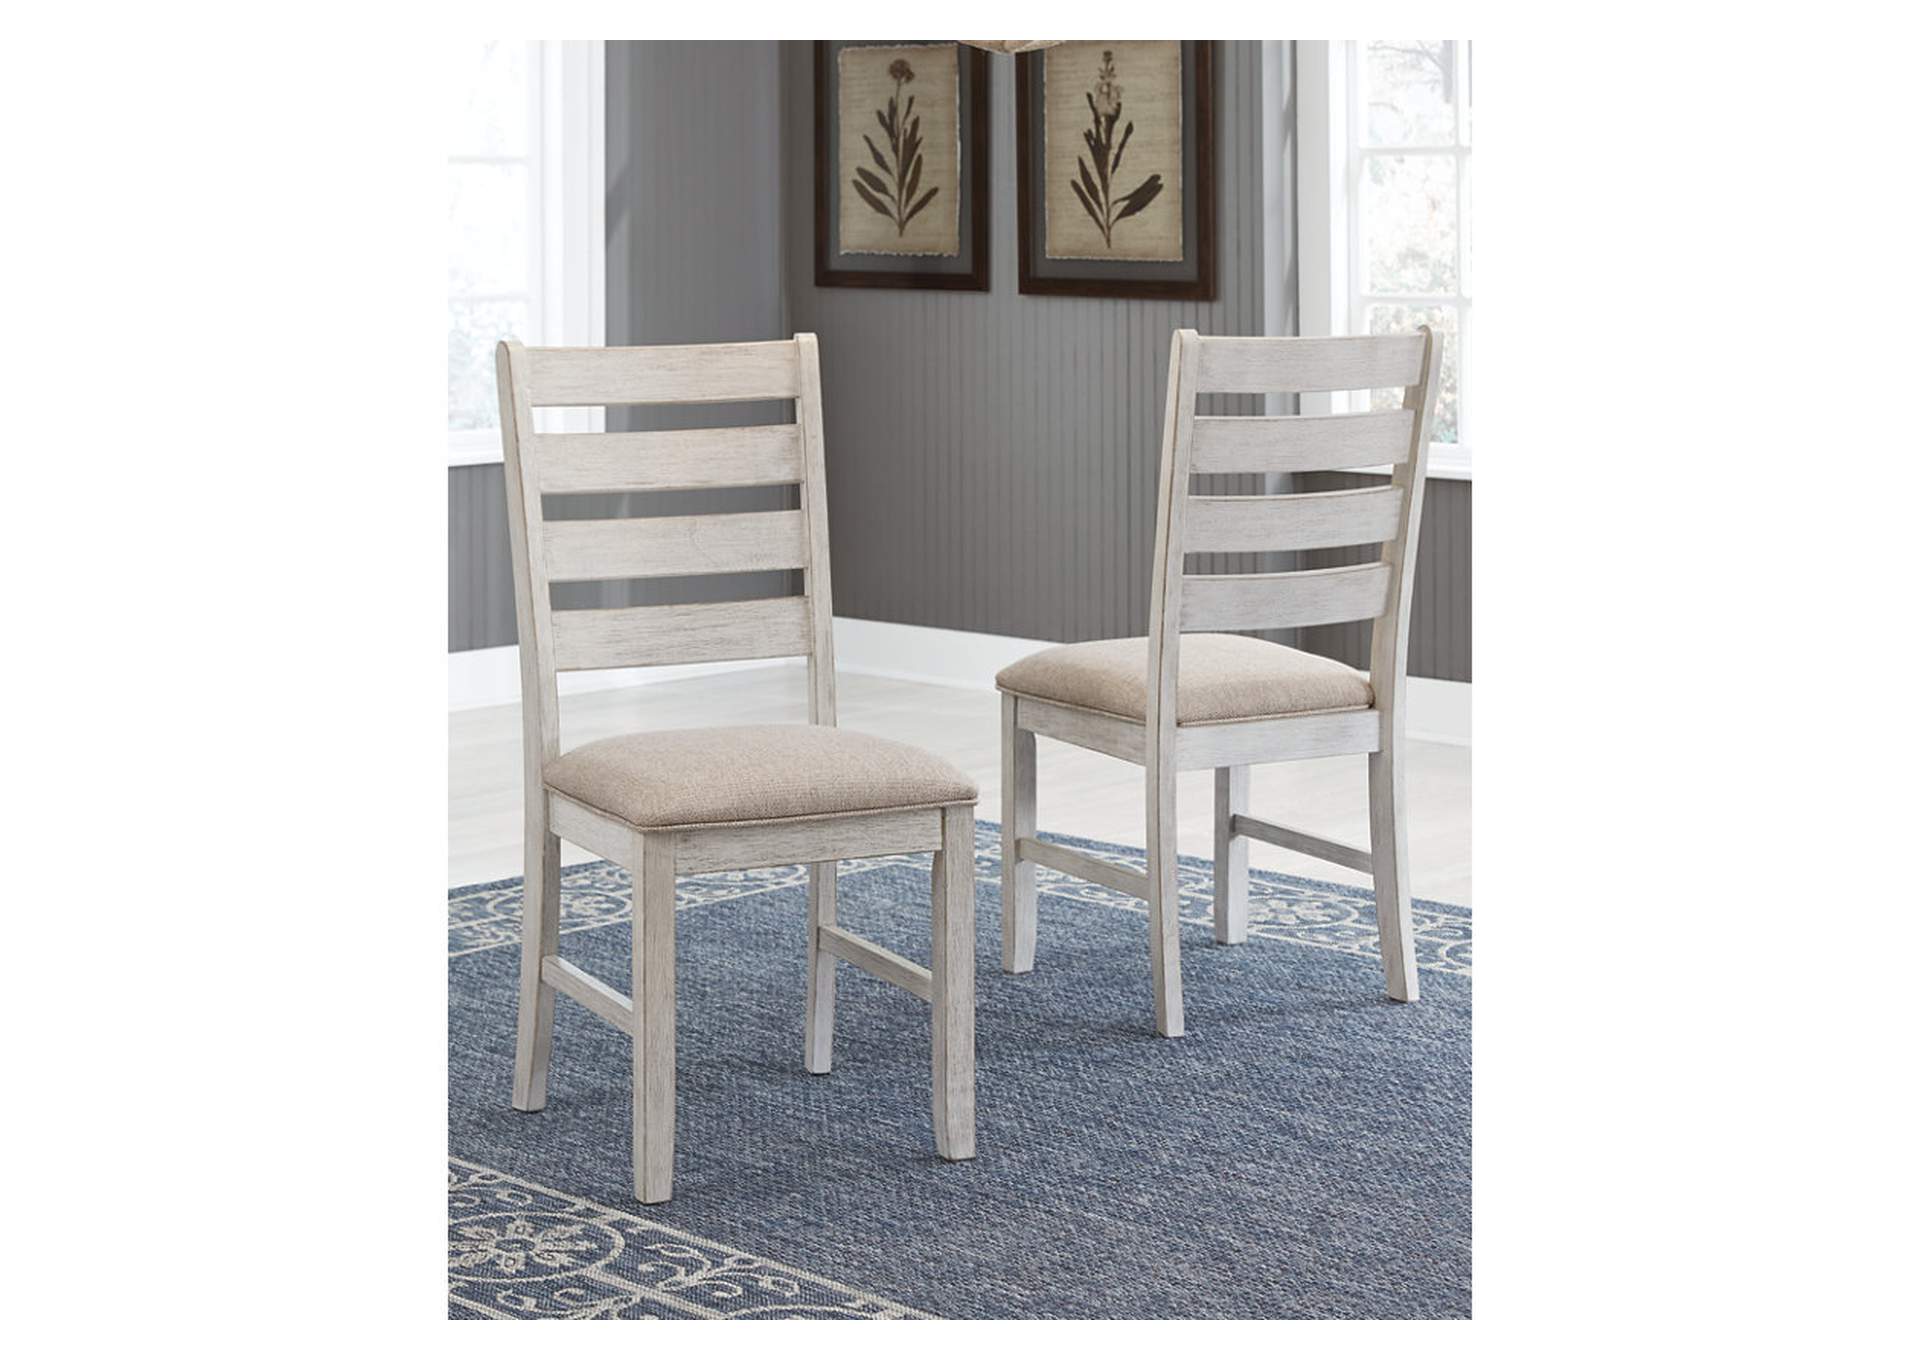 Skempton Dining Table and 2 Chairs and Bench,Signature Design By Ashley